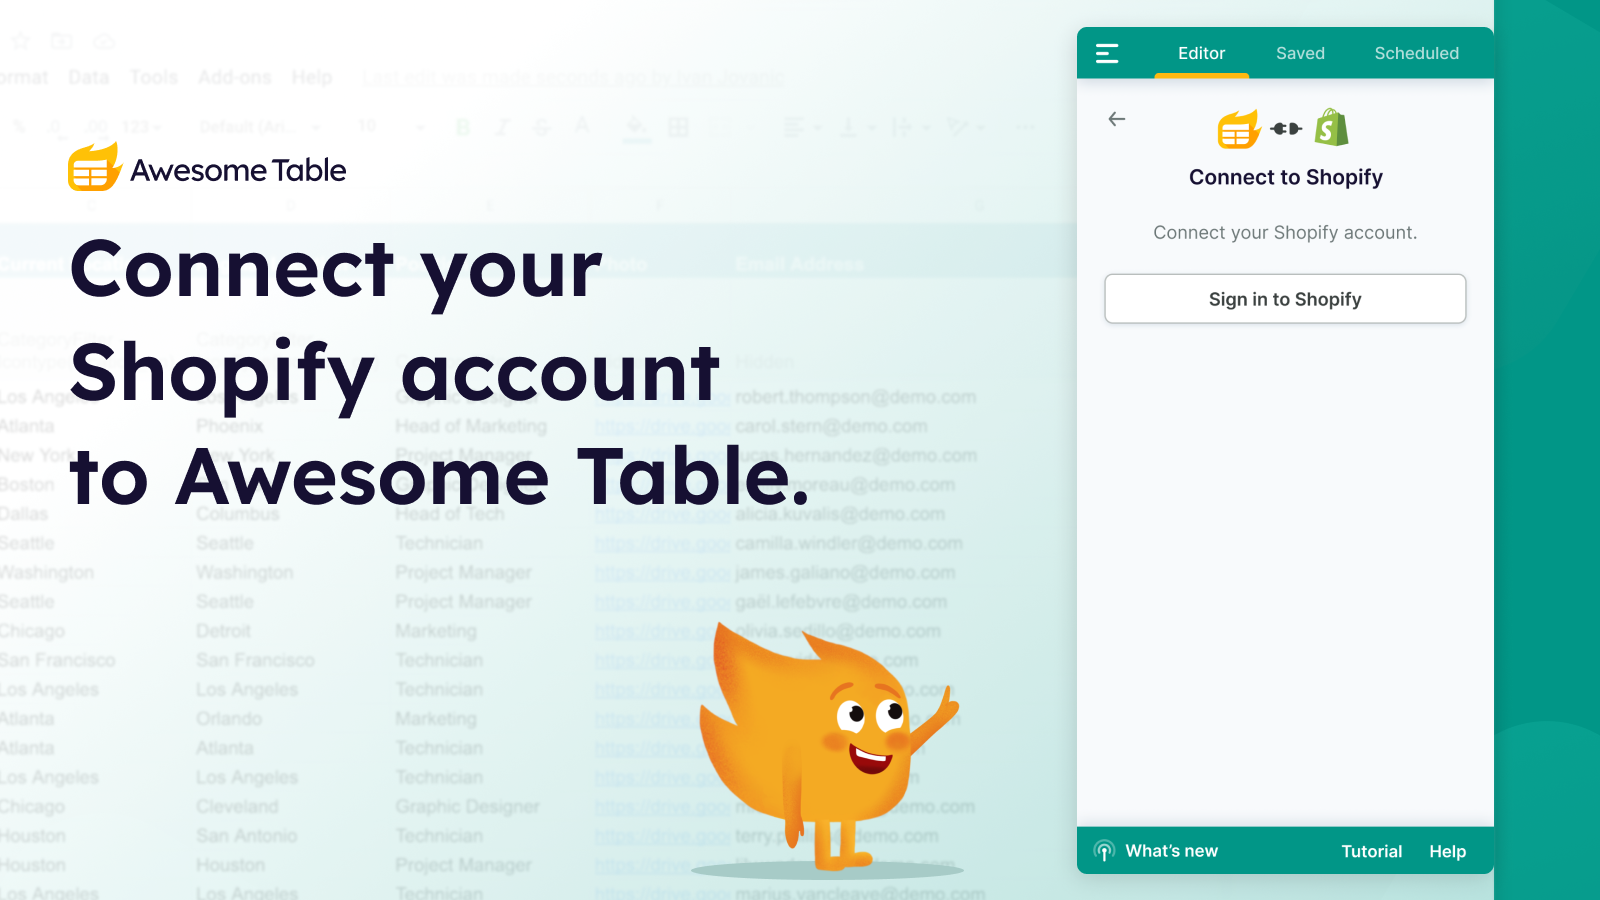 Verbind uw Shopify-account met Awesome Table